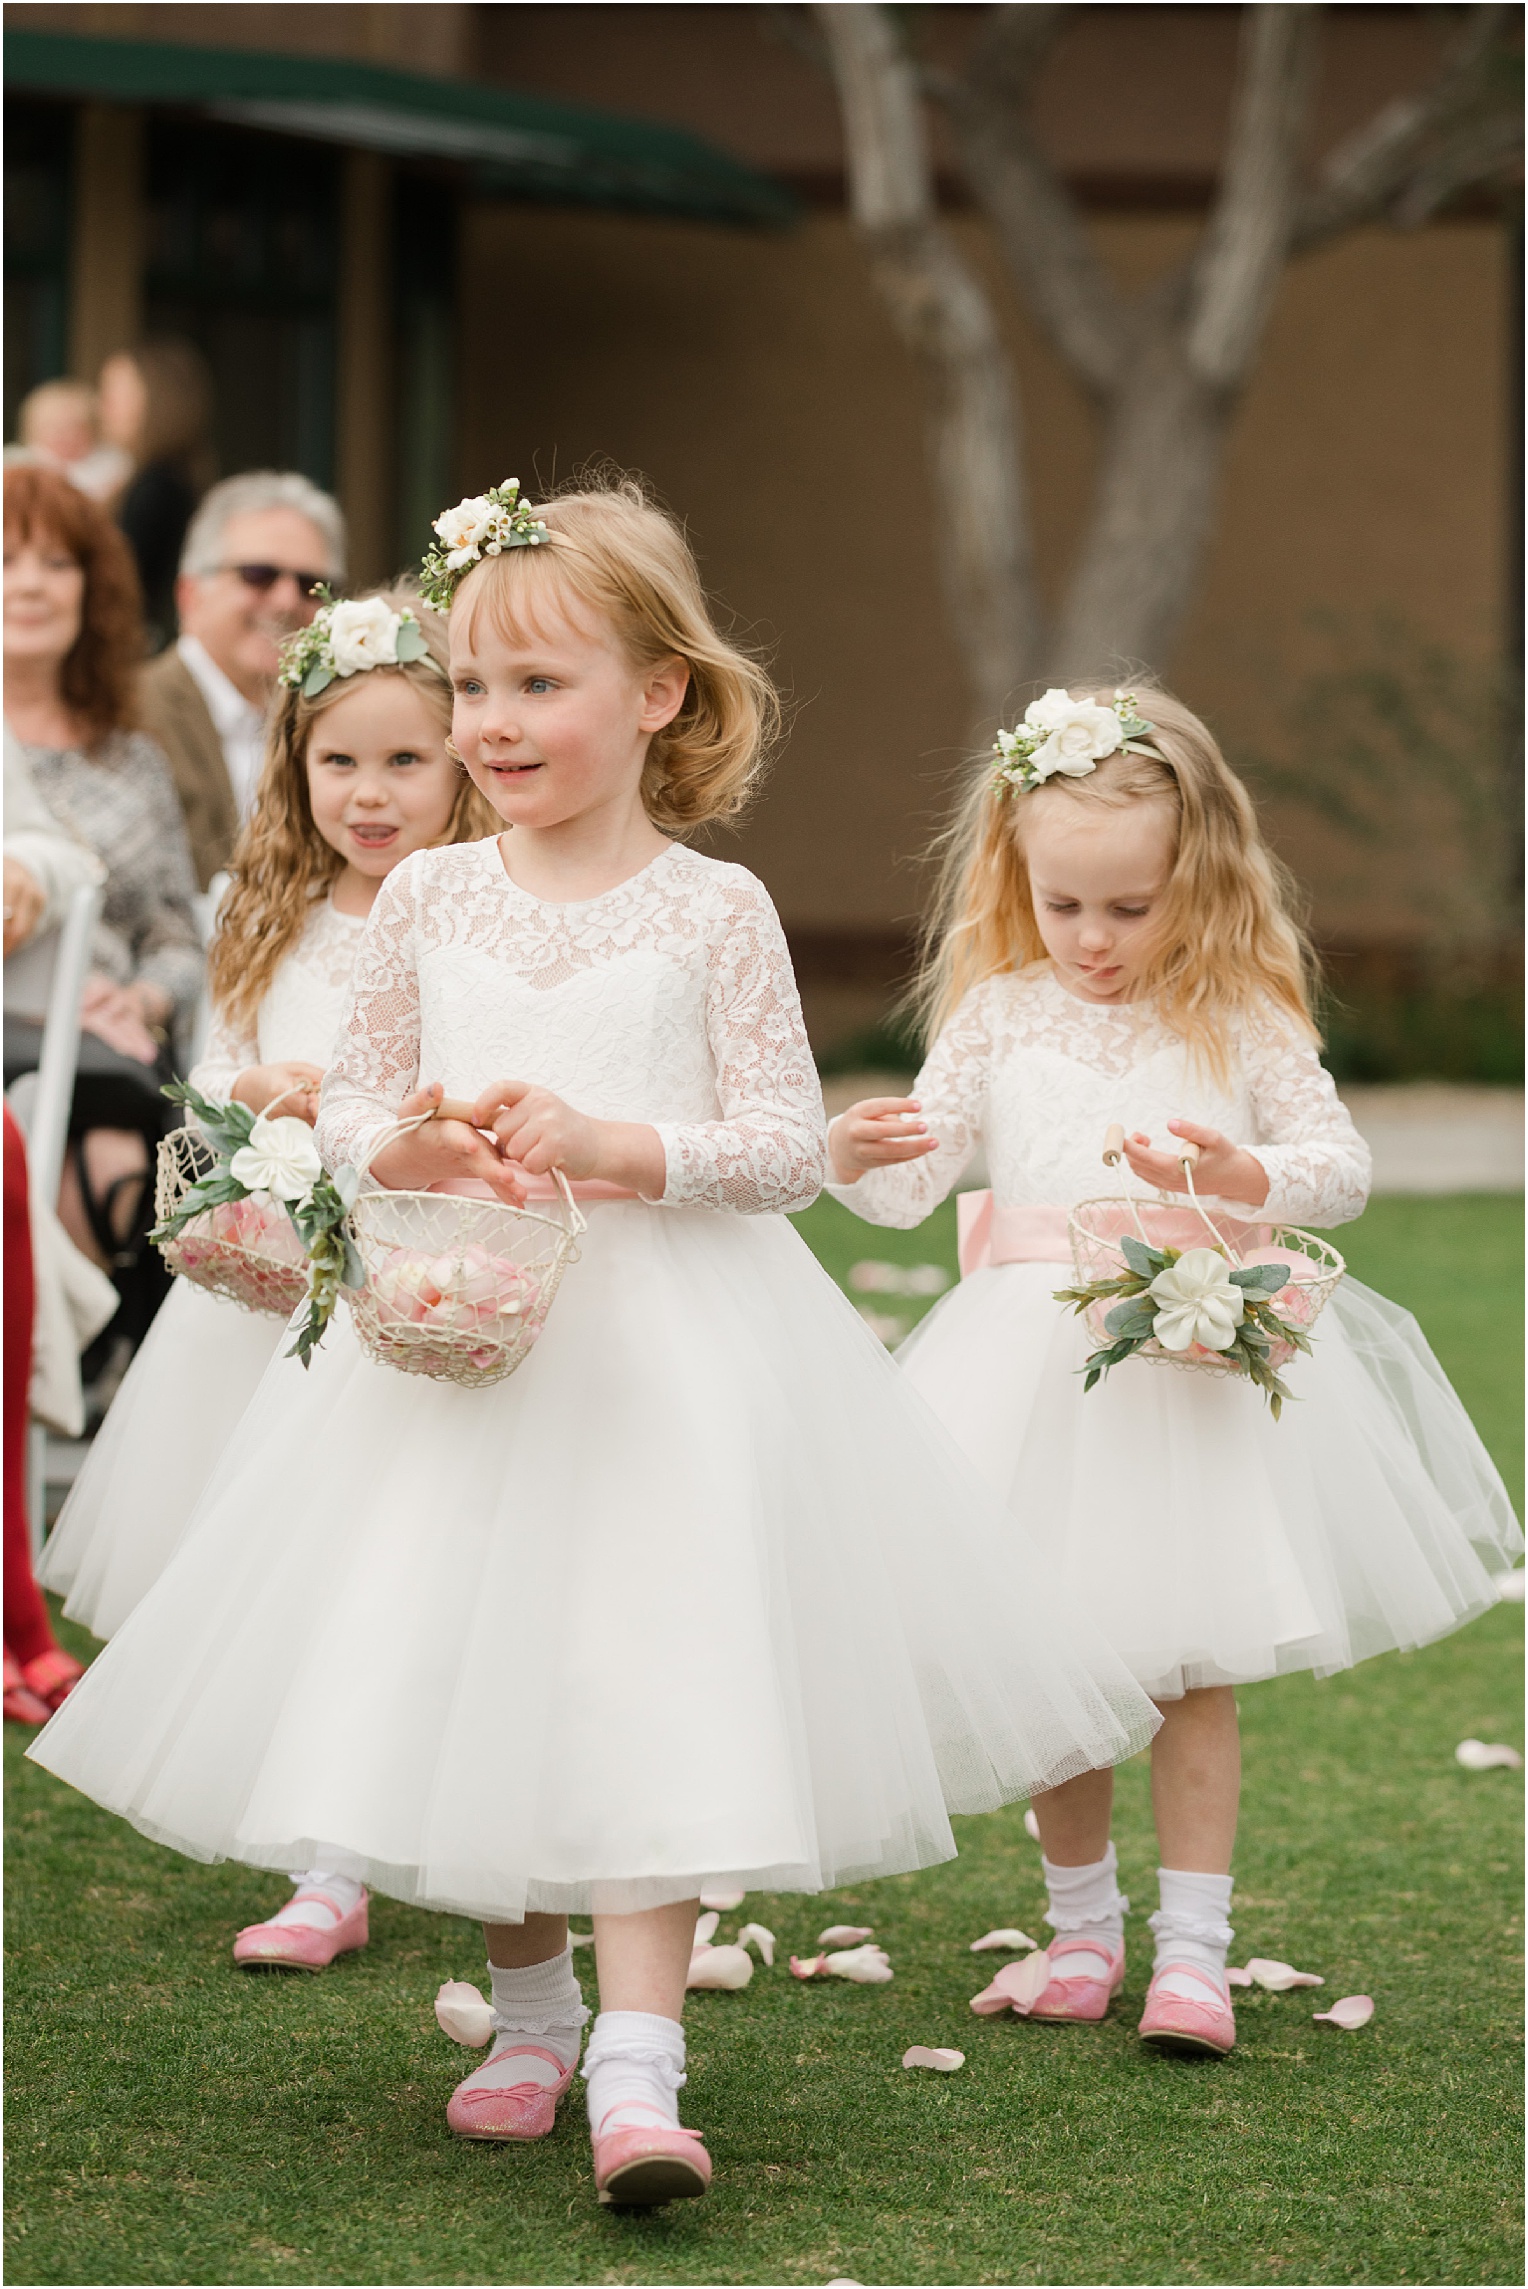 Highlands at Dove Mountain Wedding Grace + Danny flower girl photos at outdoor ceremony